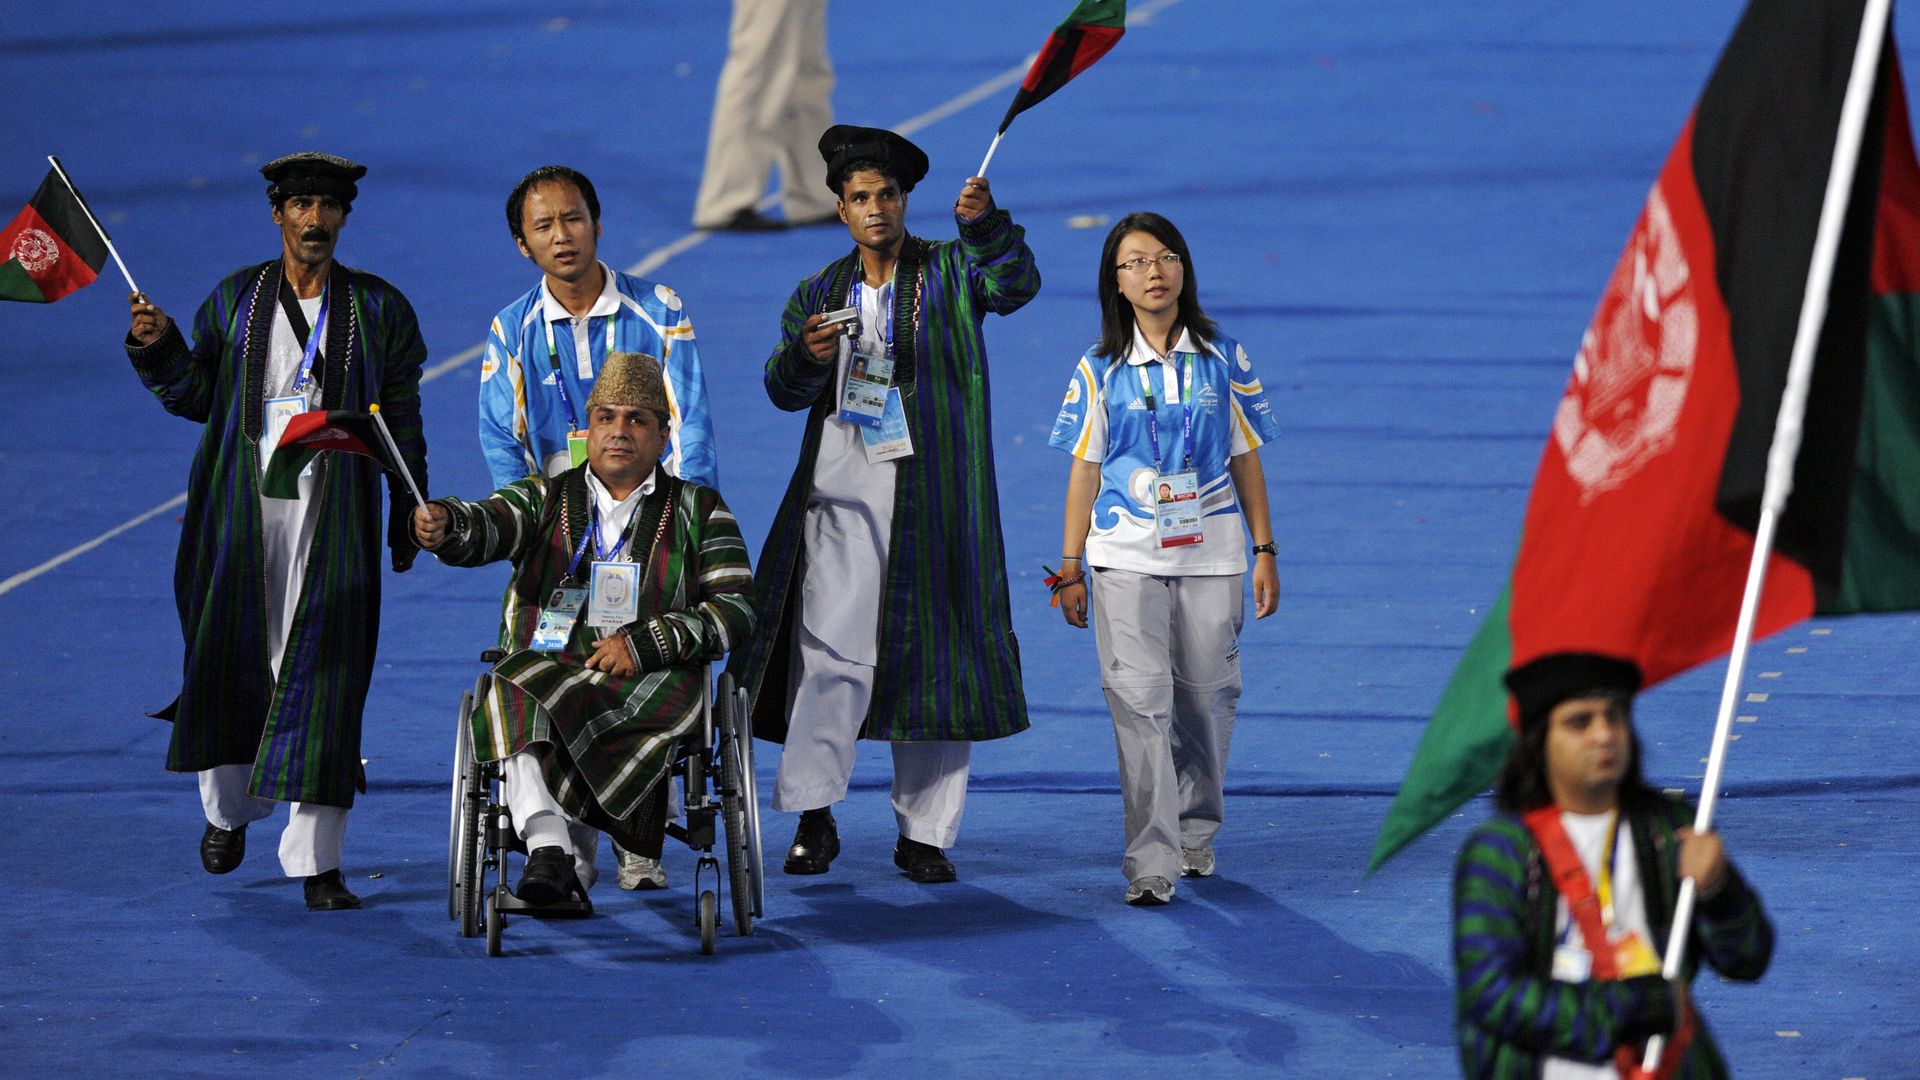 The Afghanistan delegation parades during the 2008 Beijing Paralympic Games opening ceremony.